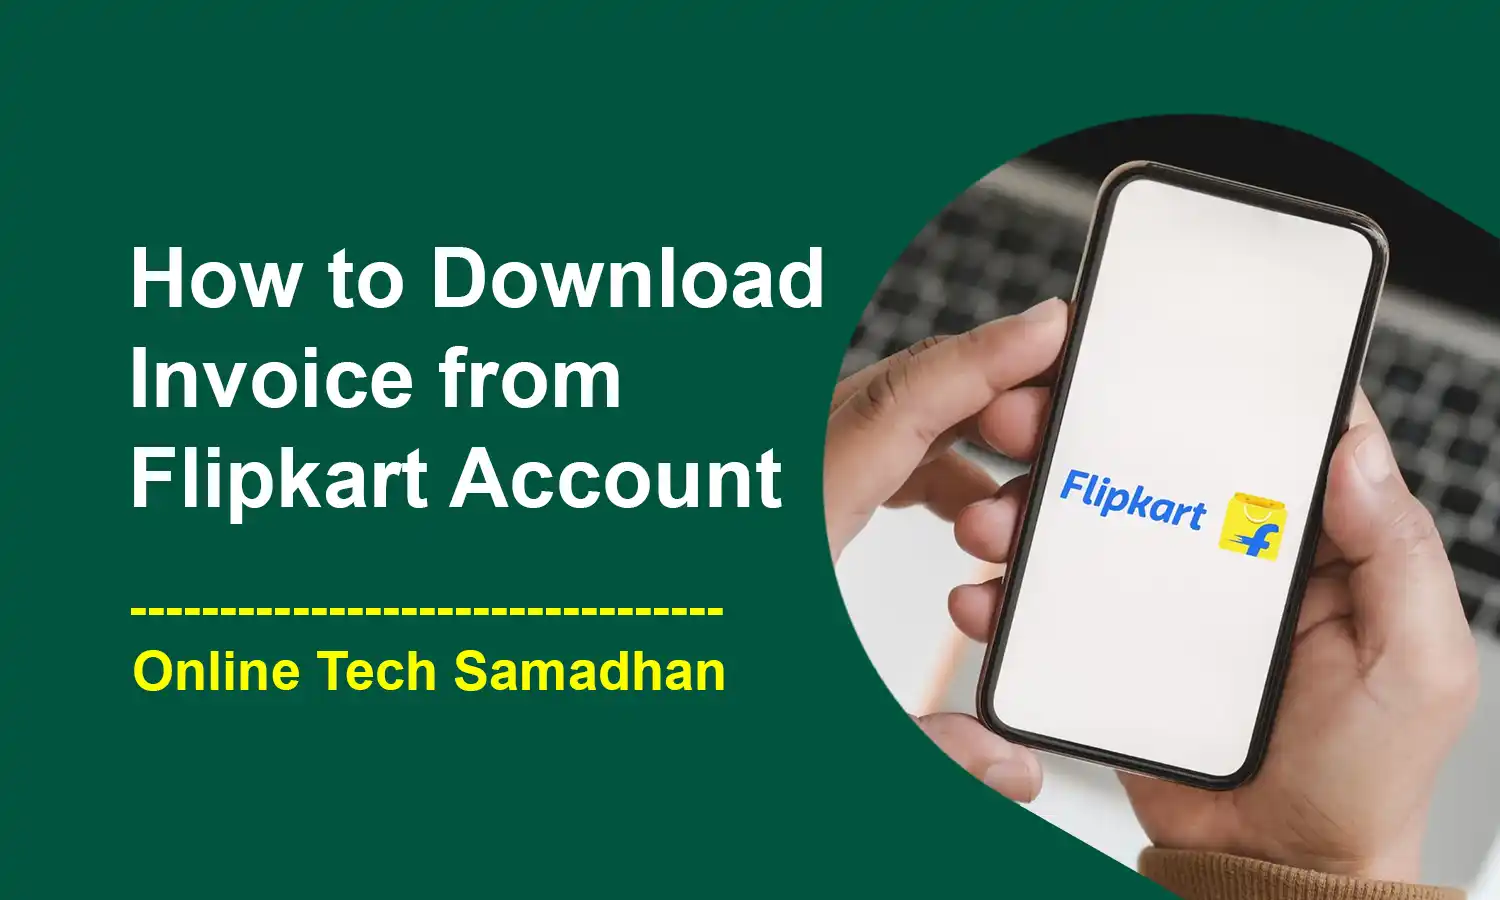 How to Download Invoice from Flipkart